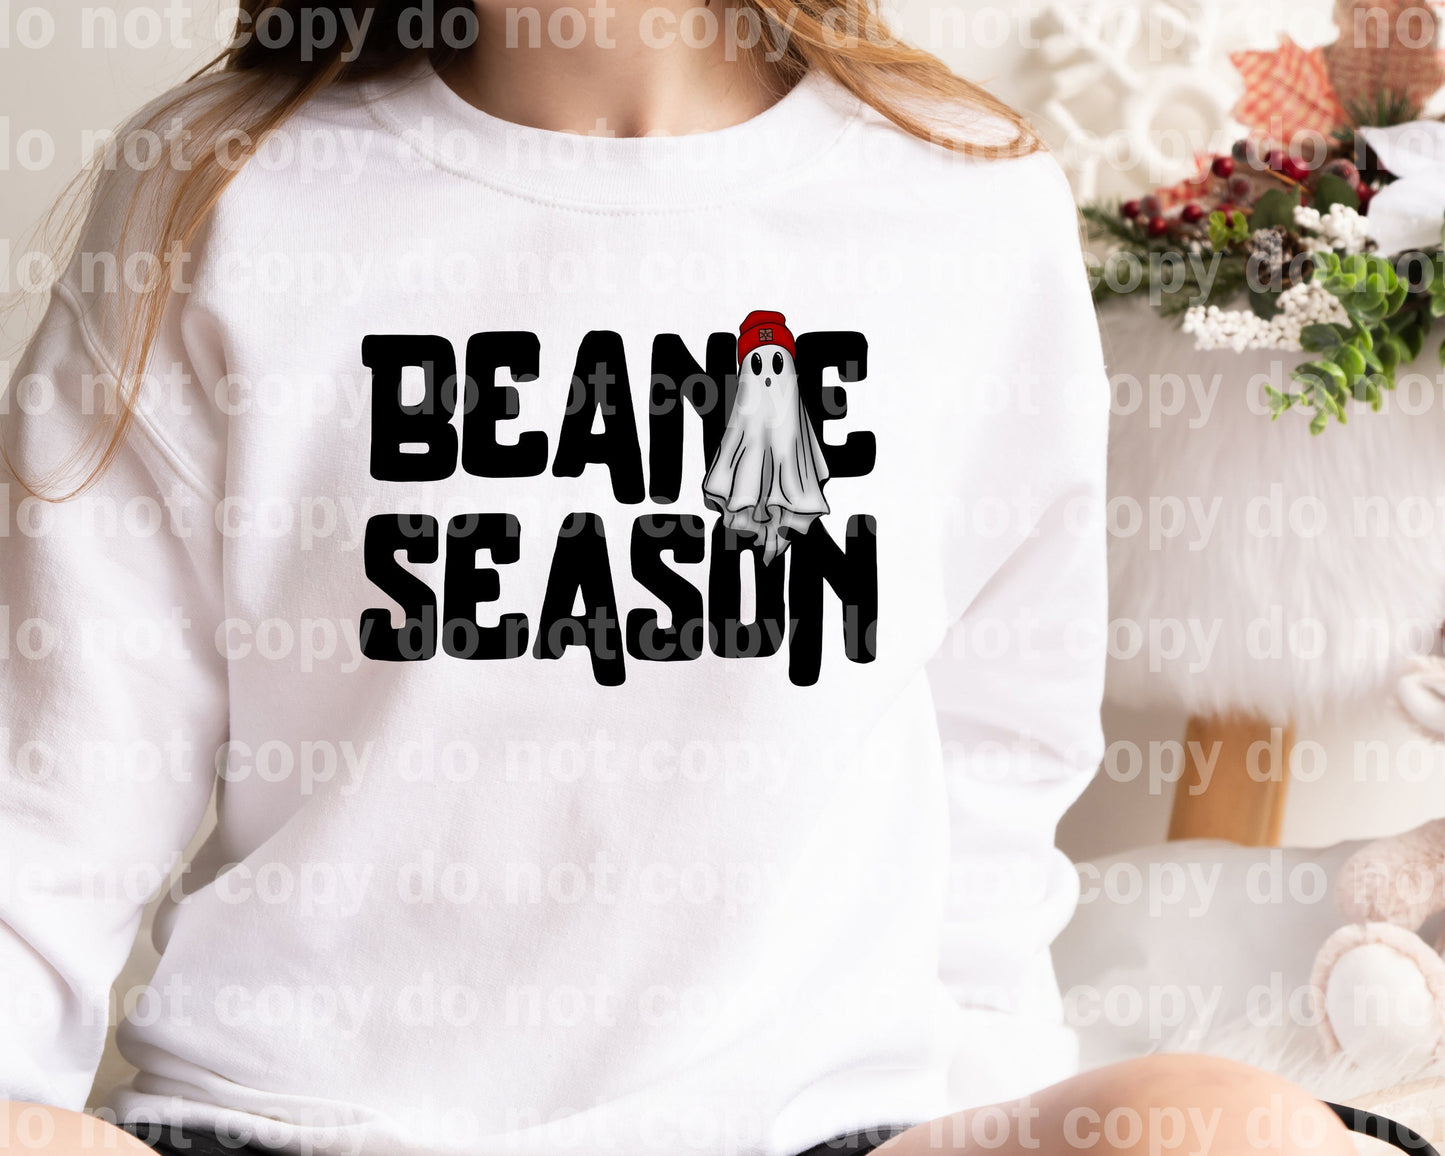 Beanie Season Ghost Red/Green with Pocket Option Dream Print or Sublimation Print